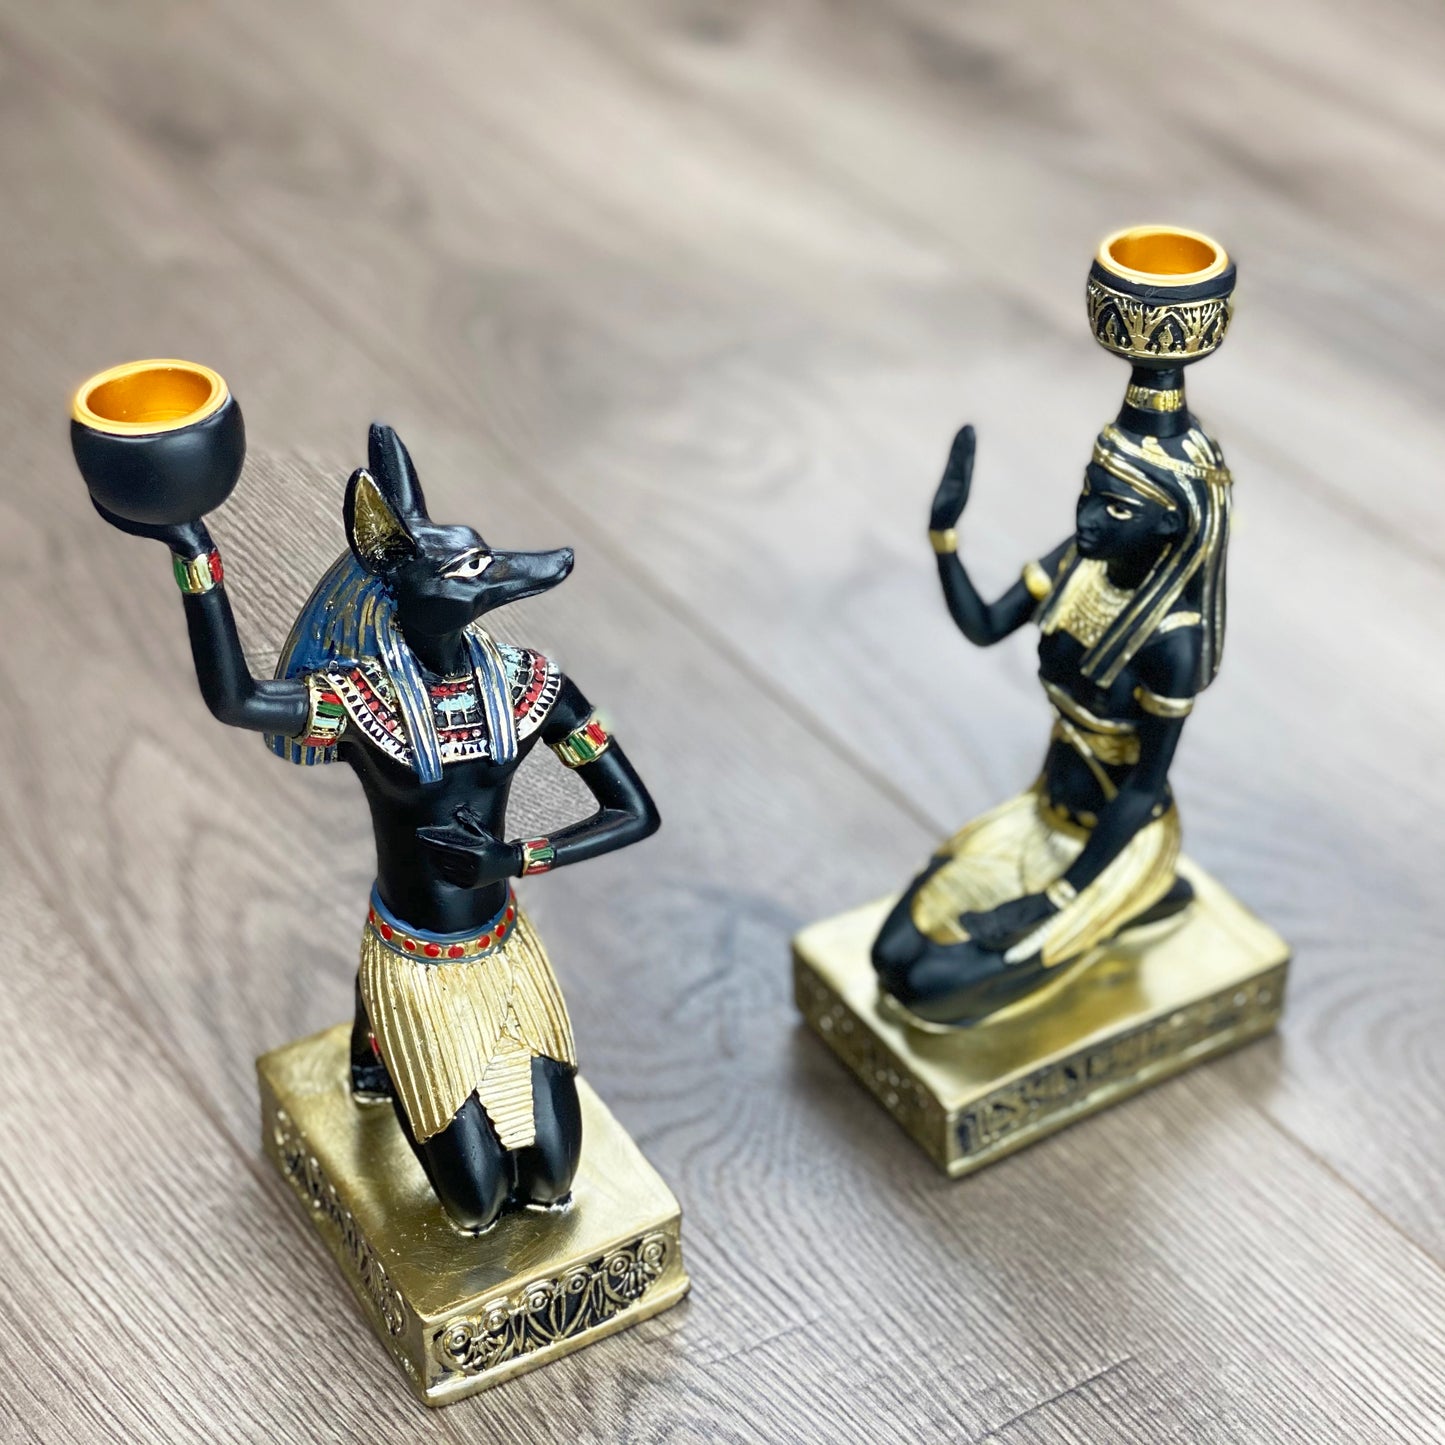 Ancient Egyptian deities Statue Candle holder, Set of 3, Vintage Style God and Goddess Home Décor for Holiday